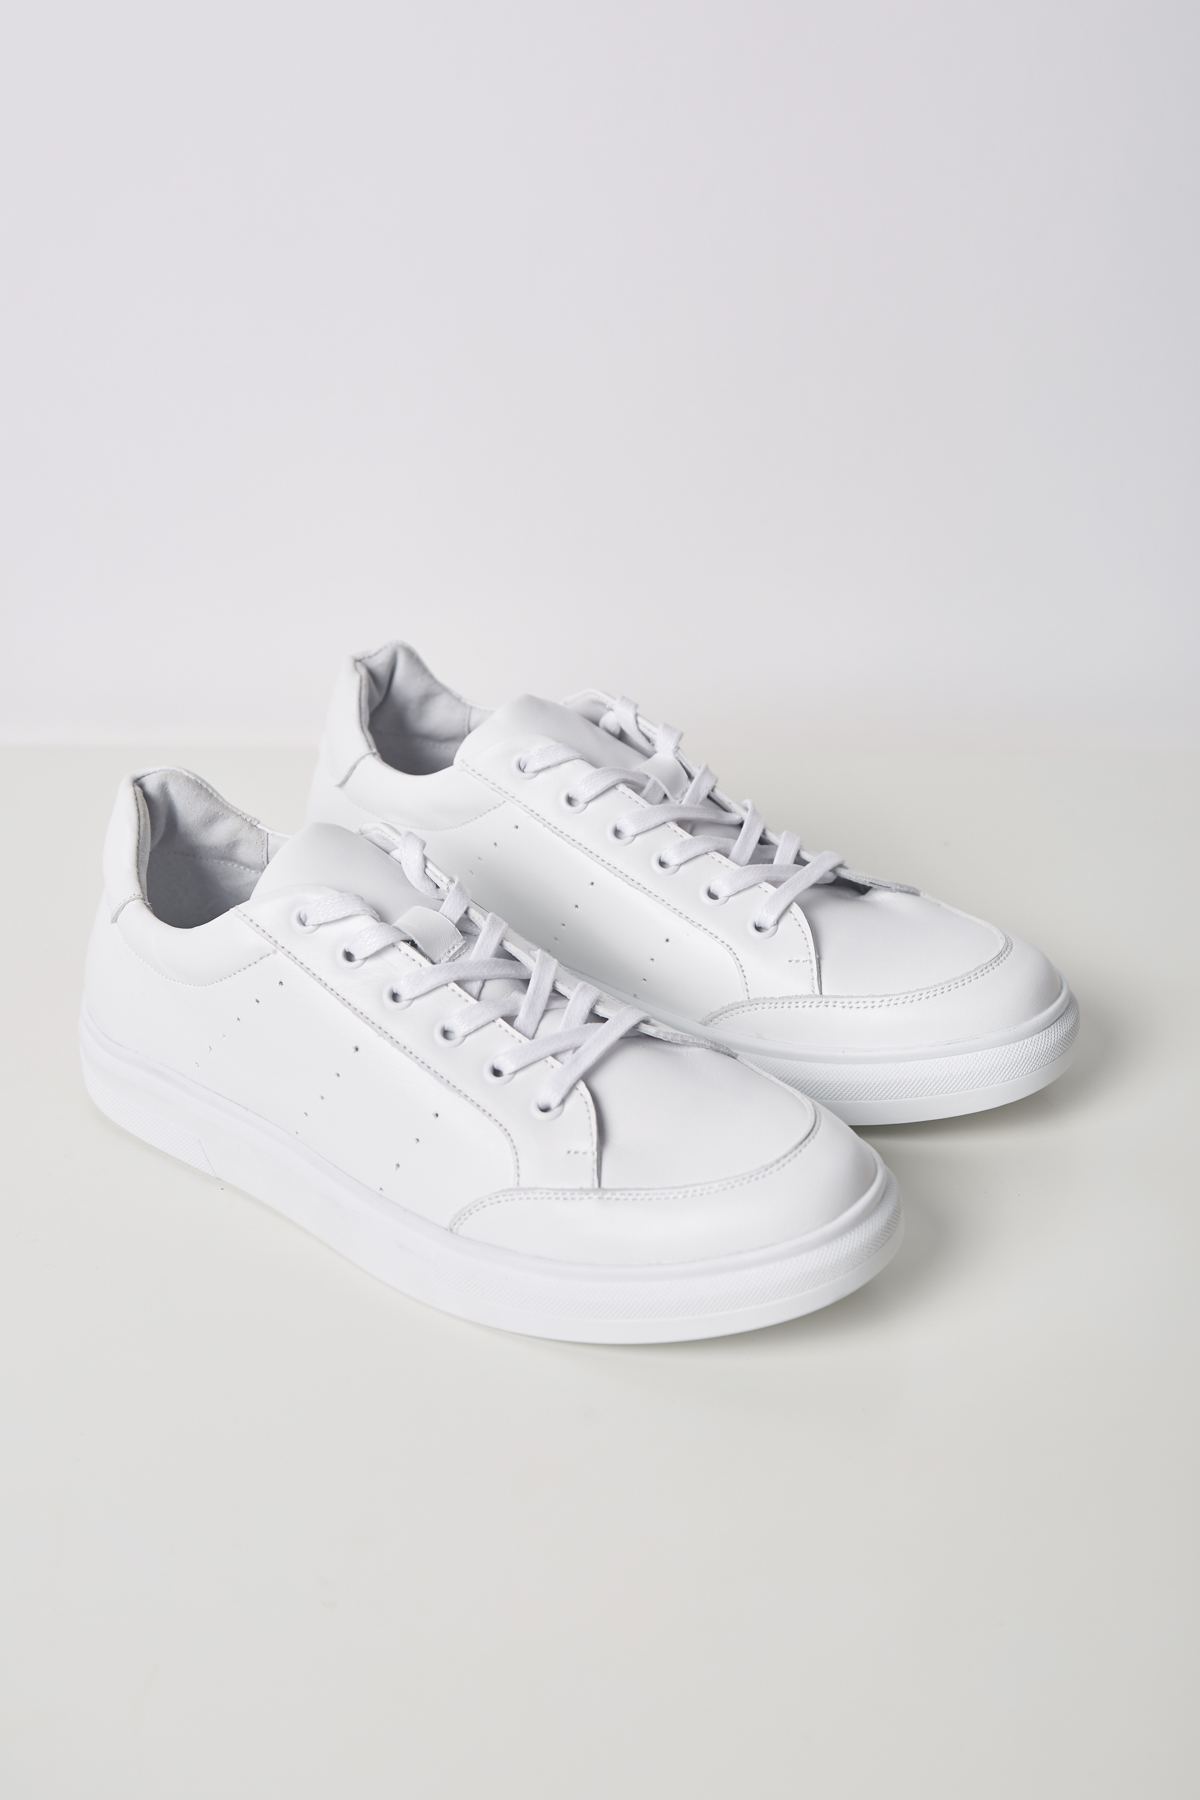 White leather sneakers, photo 2